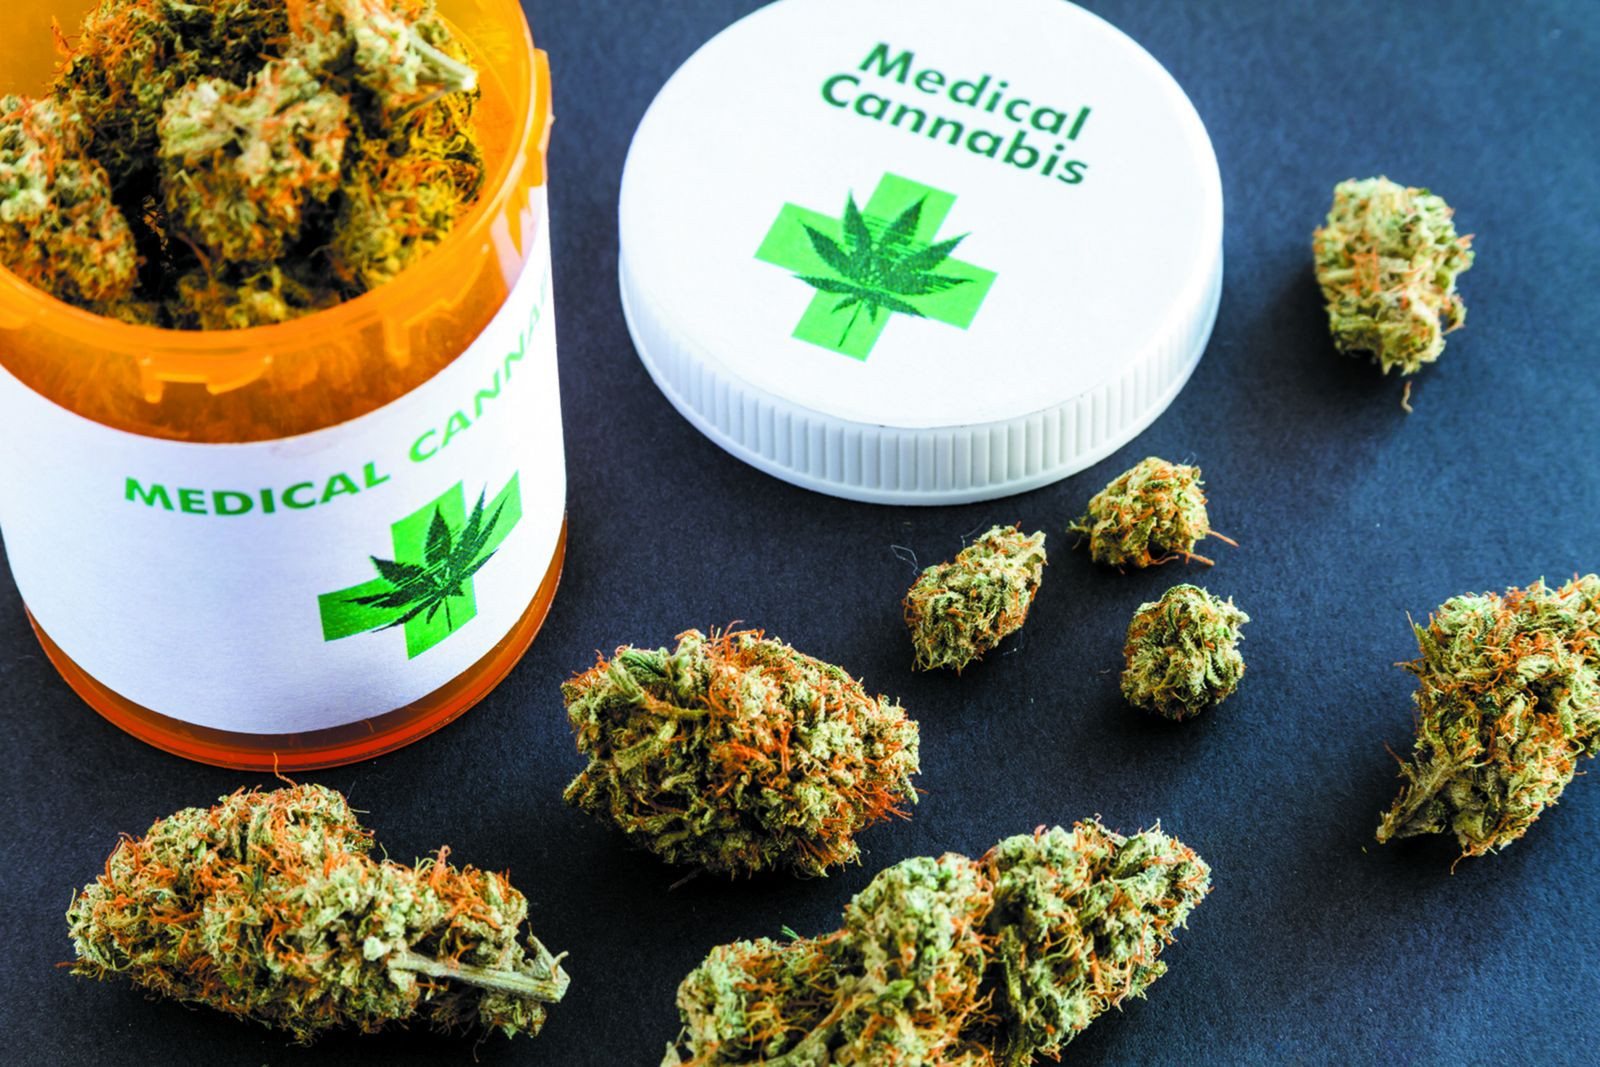 A medical container from the pharmacy showing medical cannabis